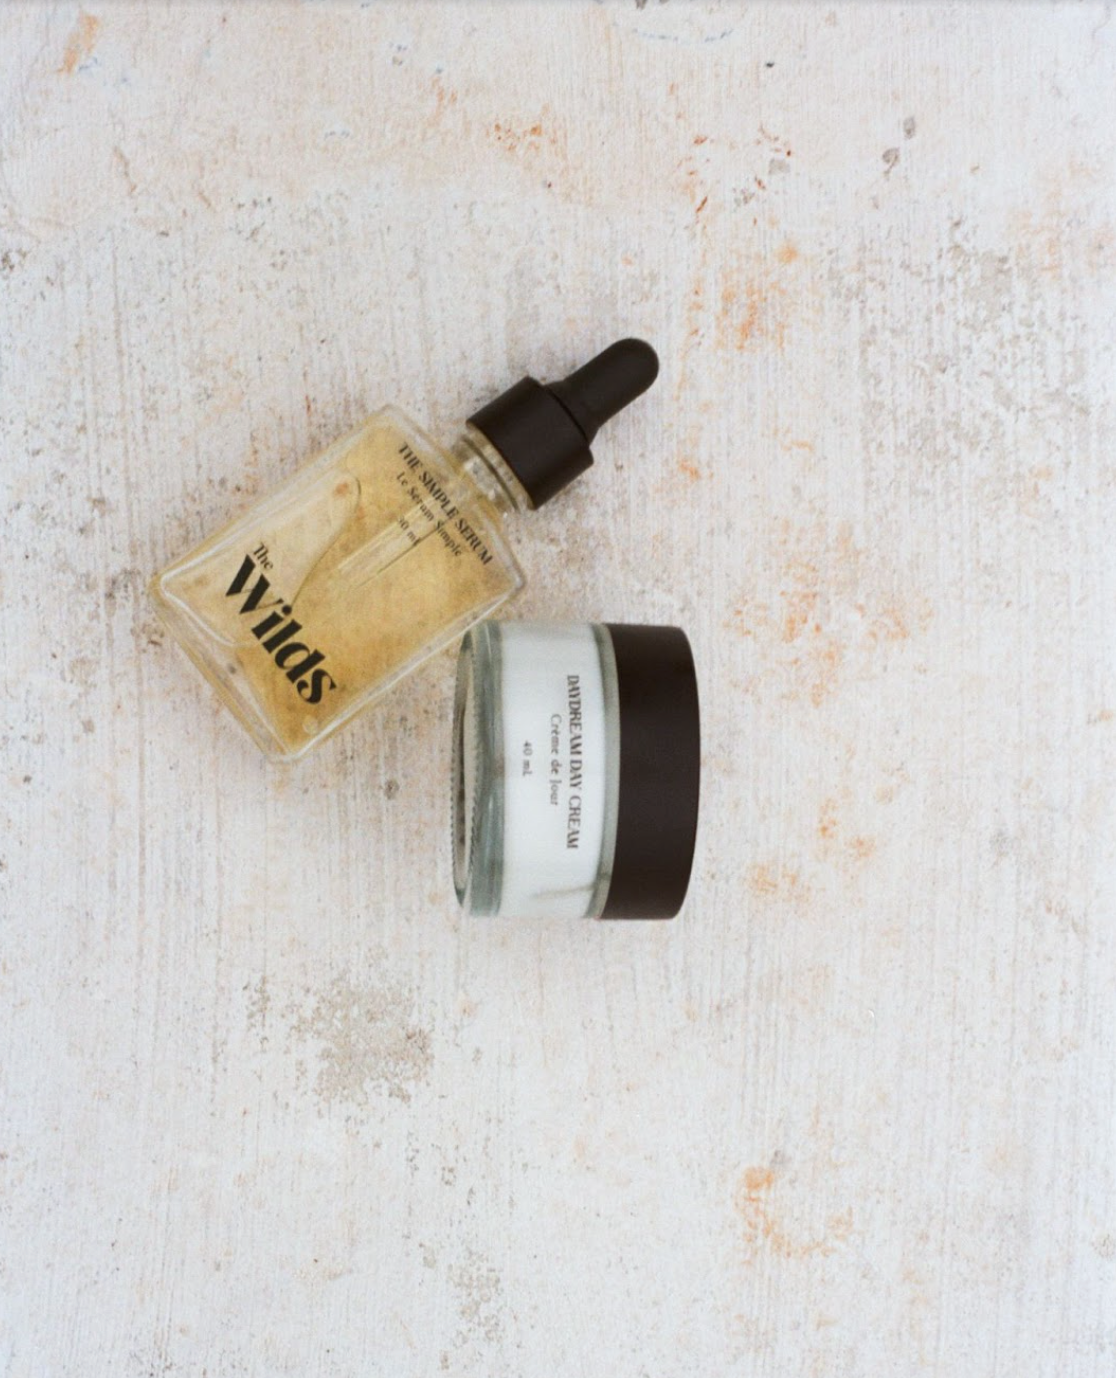 The Wilds; European Summer The Wilds Skincare